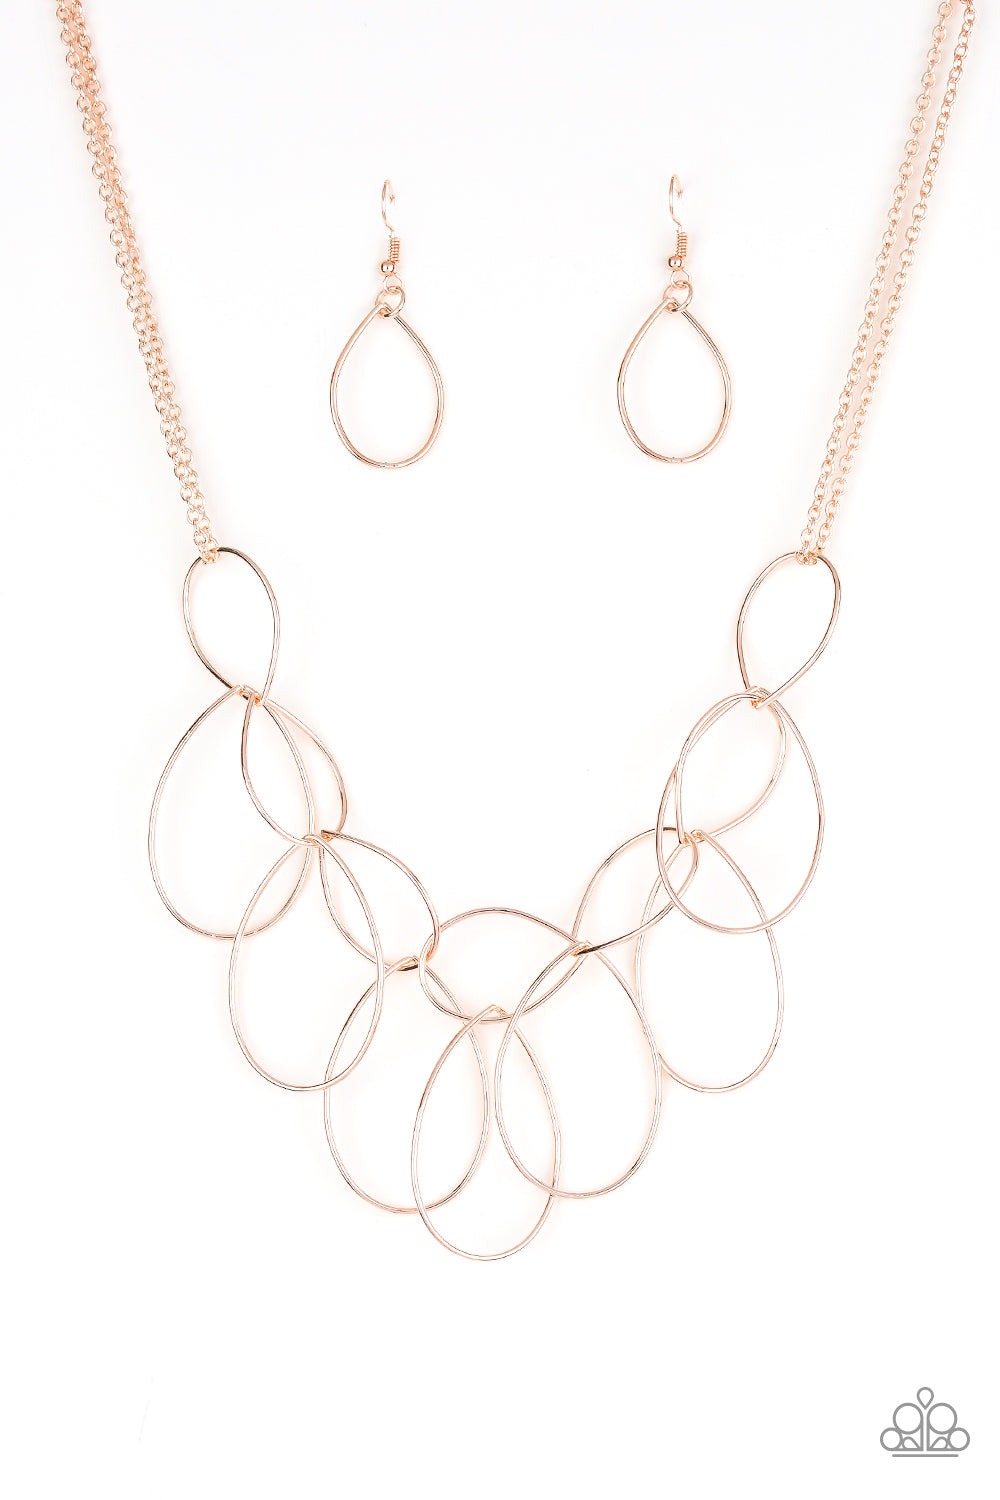 Top TEAR Fashion - rose gold - Paparazzi necklace